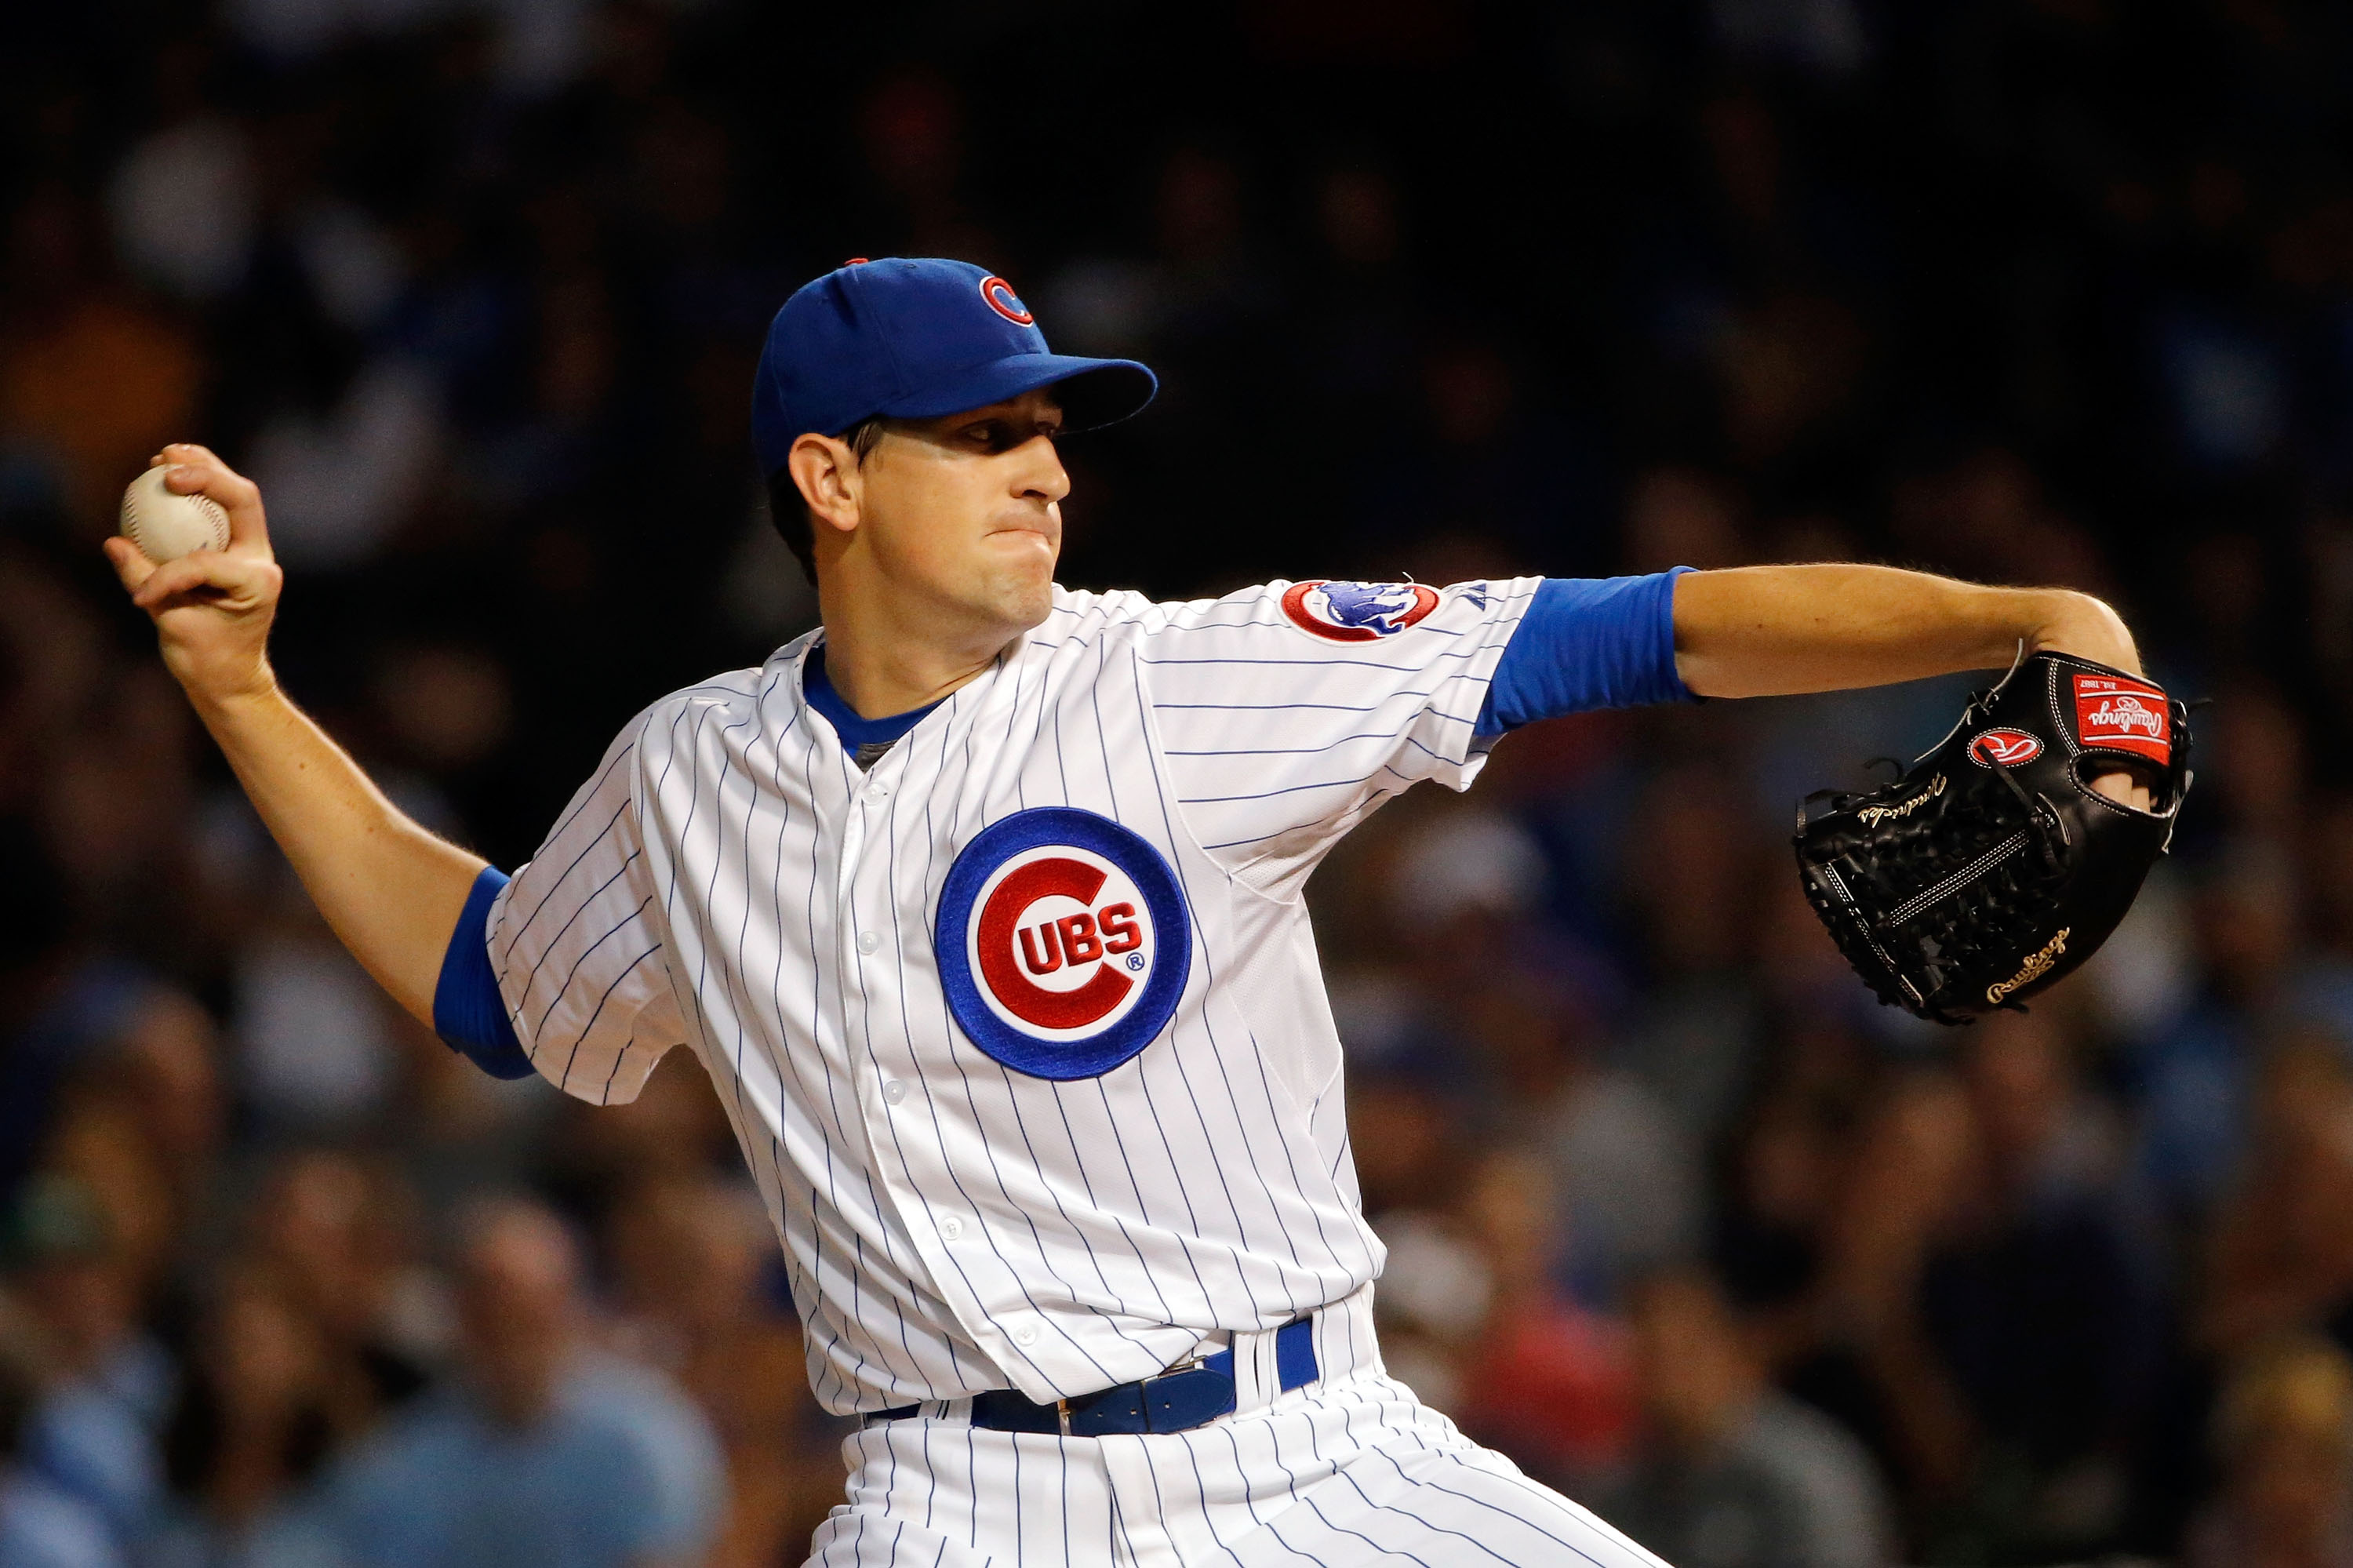 How to Watch Cubs vs. Cardinals NLDS Game 2 Live Stream